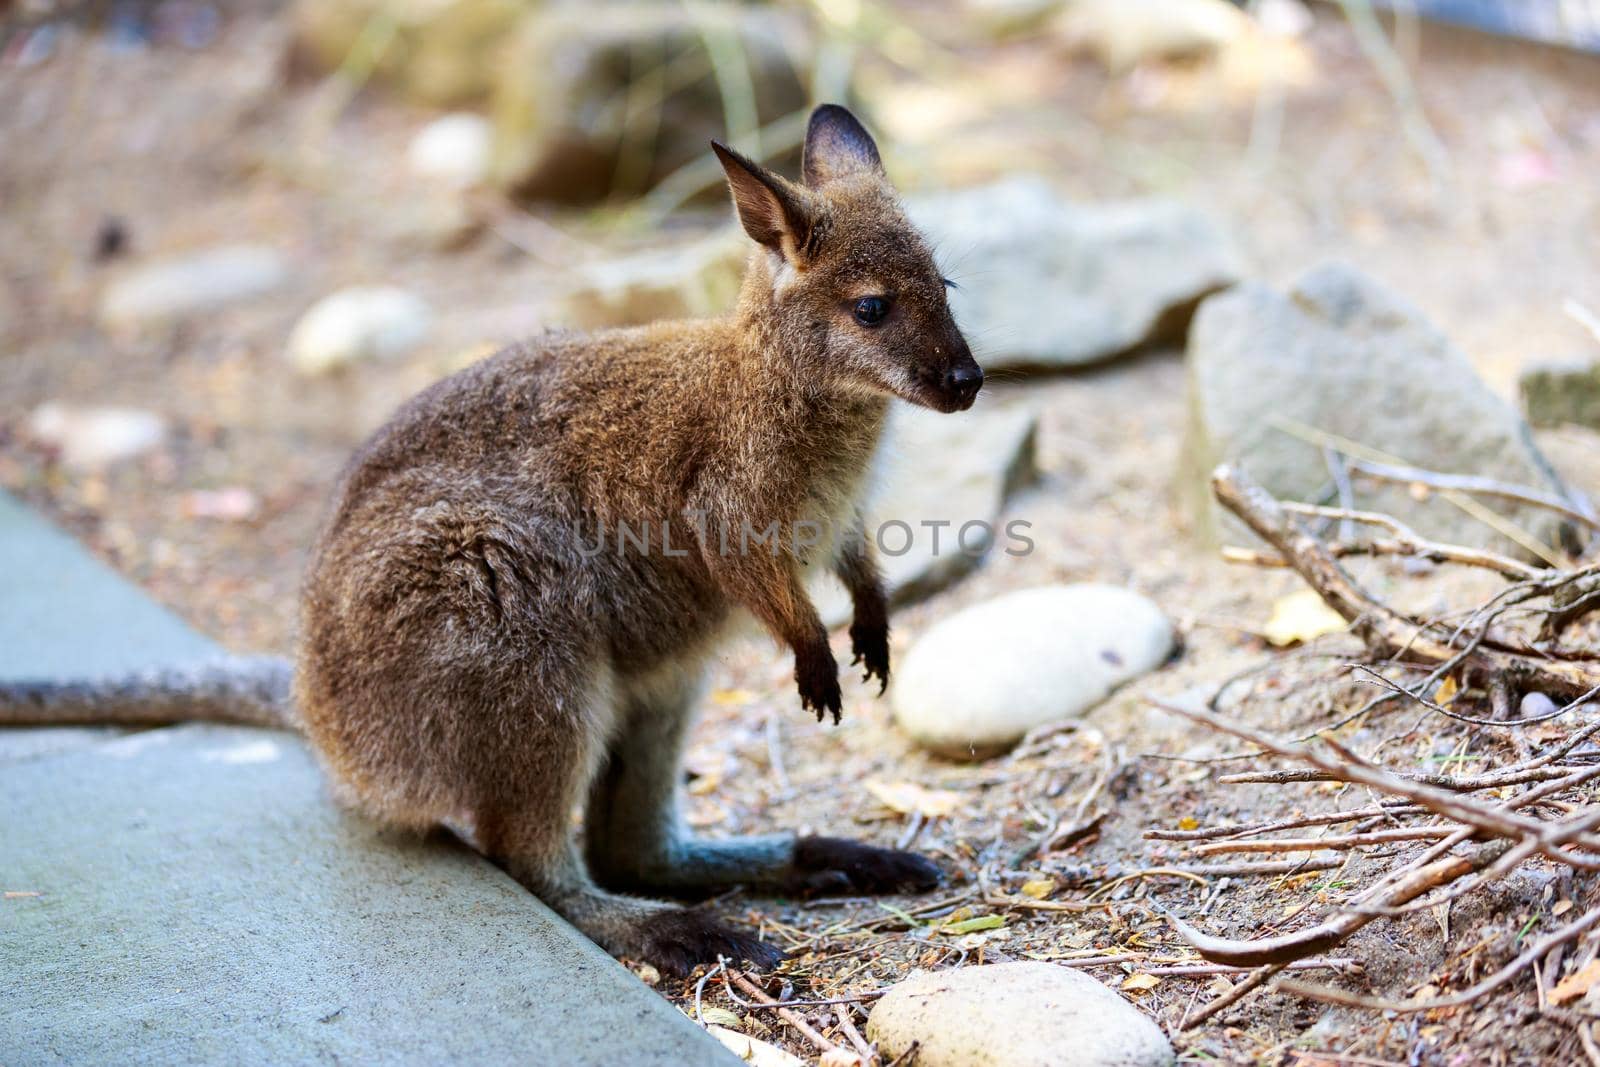 Wallaby by gepeng